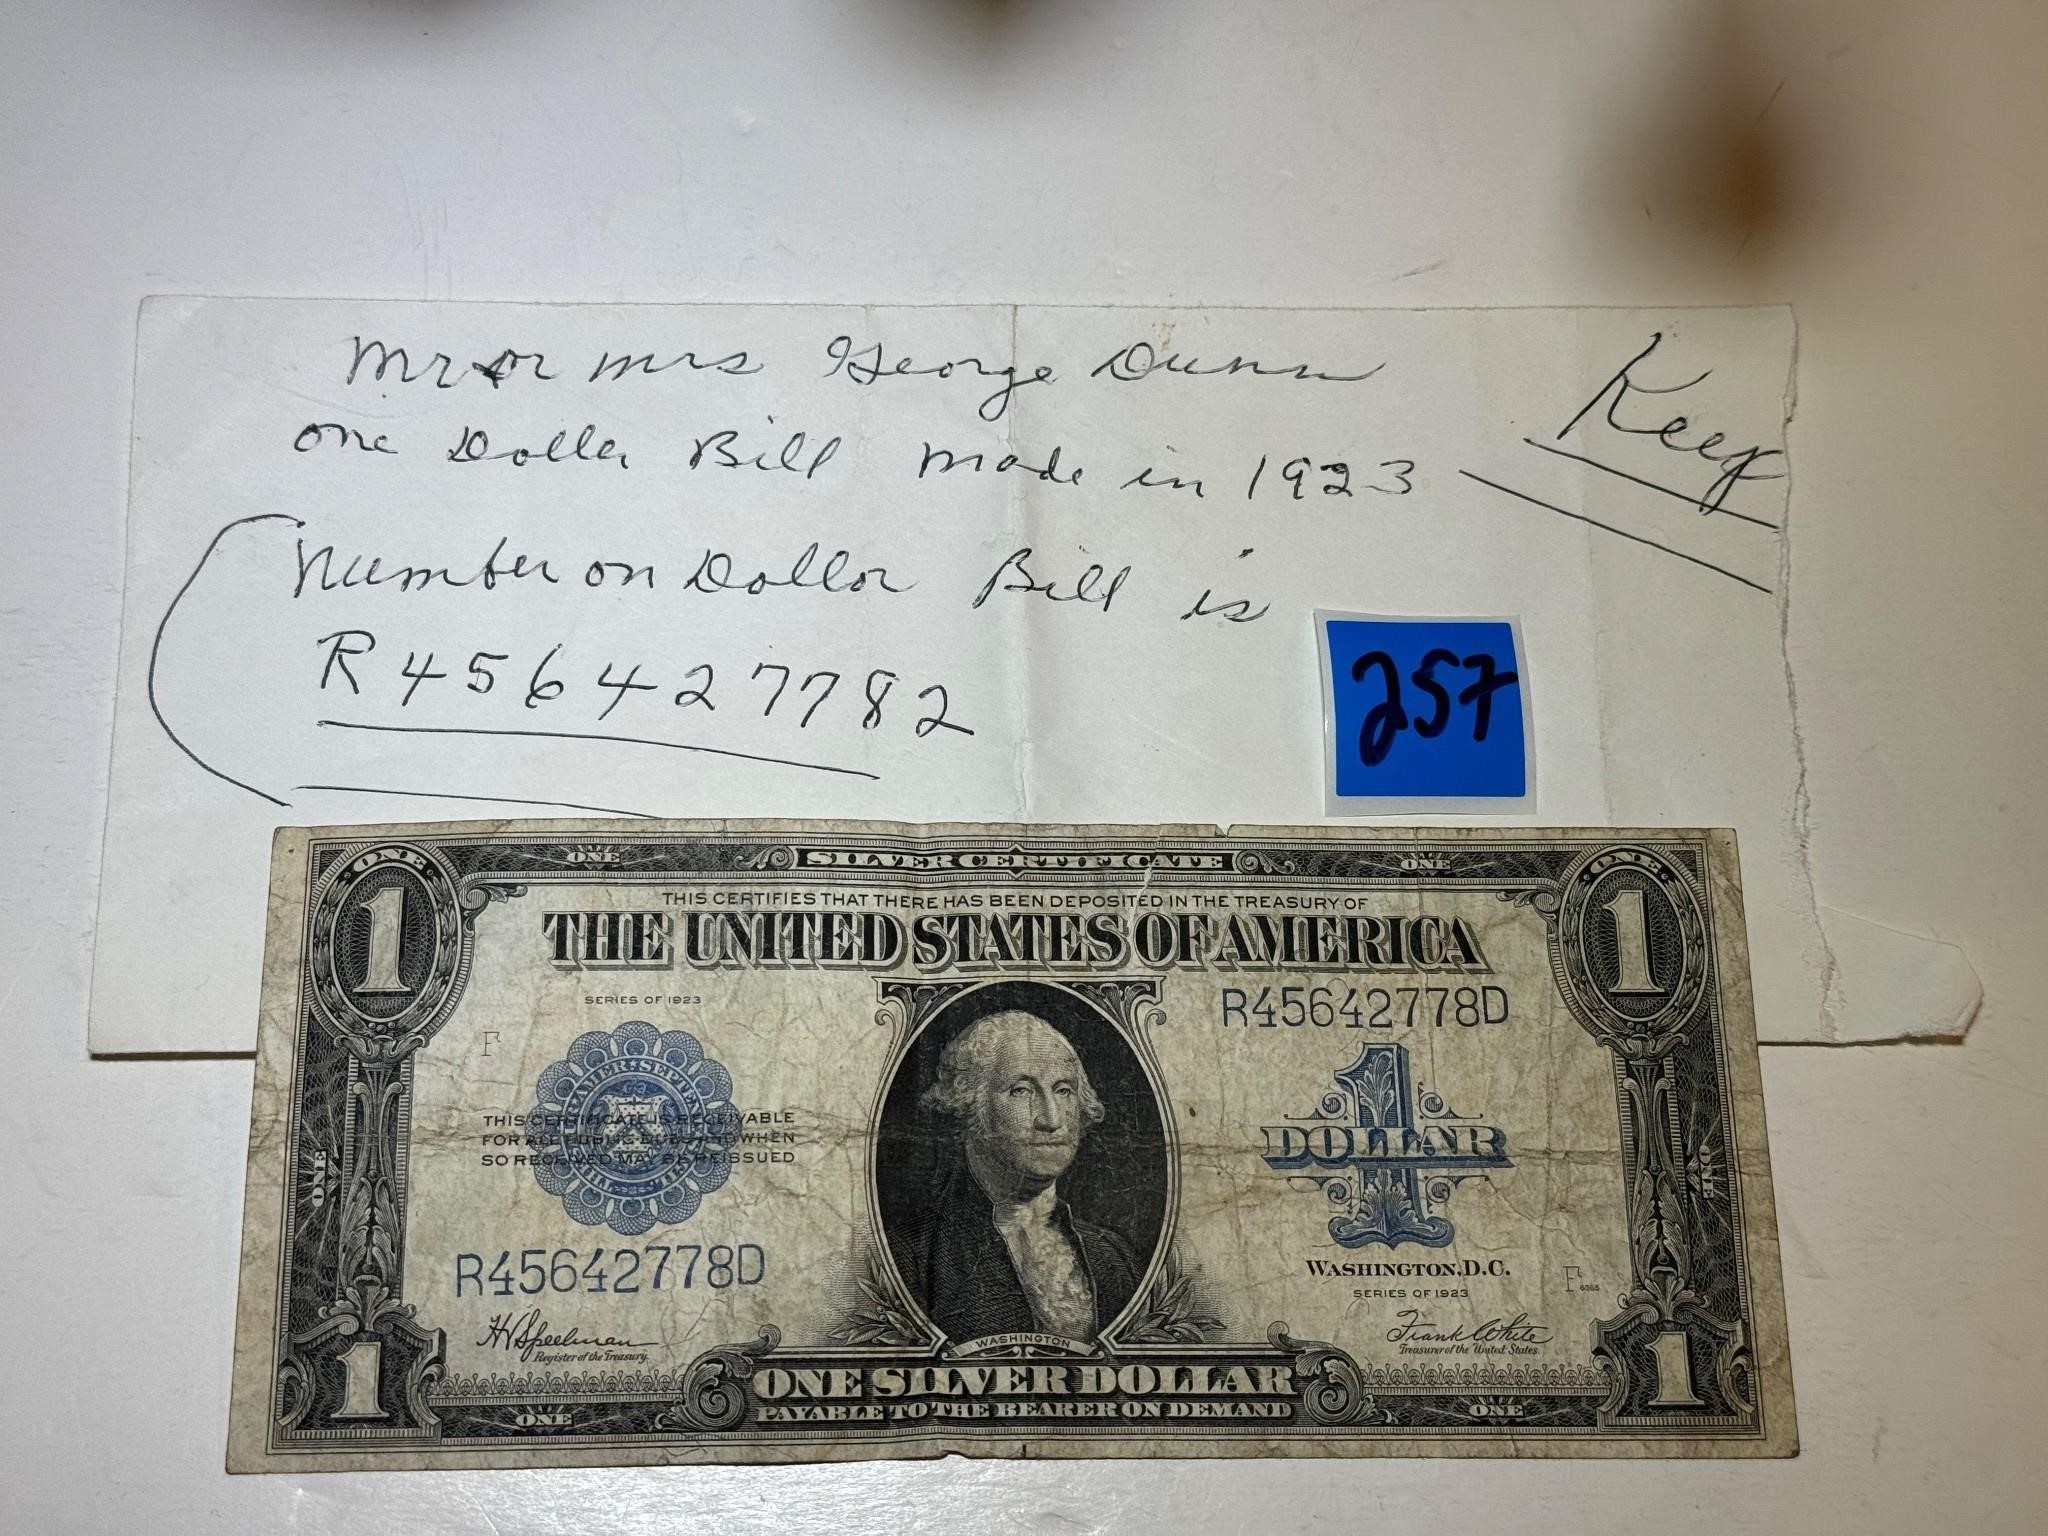 1923 $1 Certificate w/ beautifully engraved design